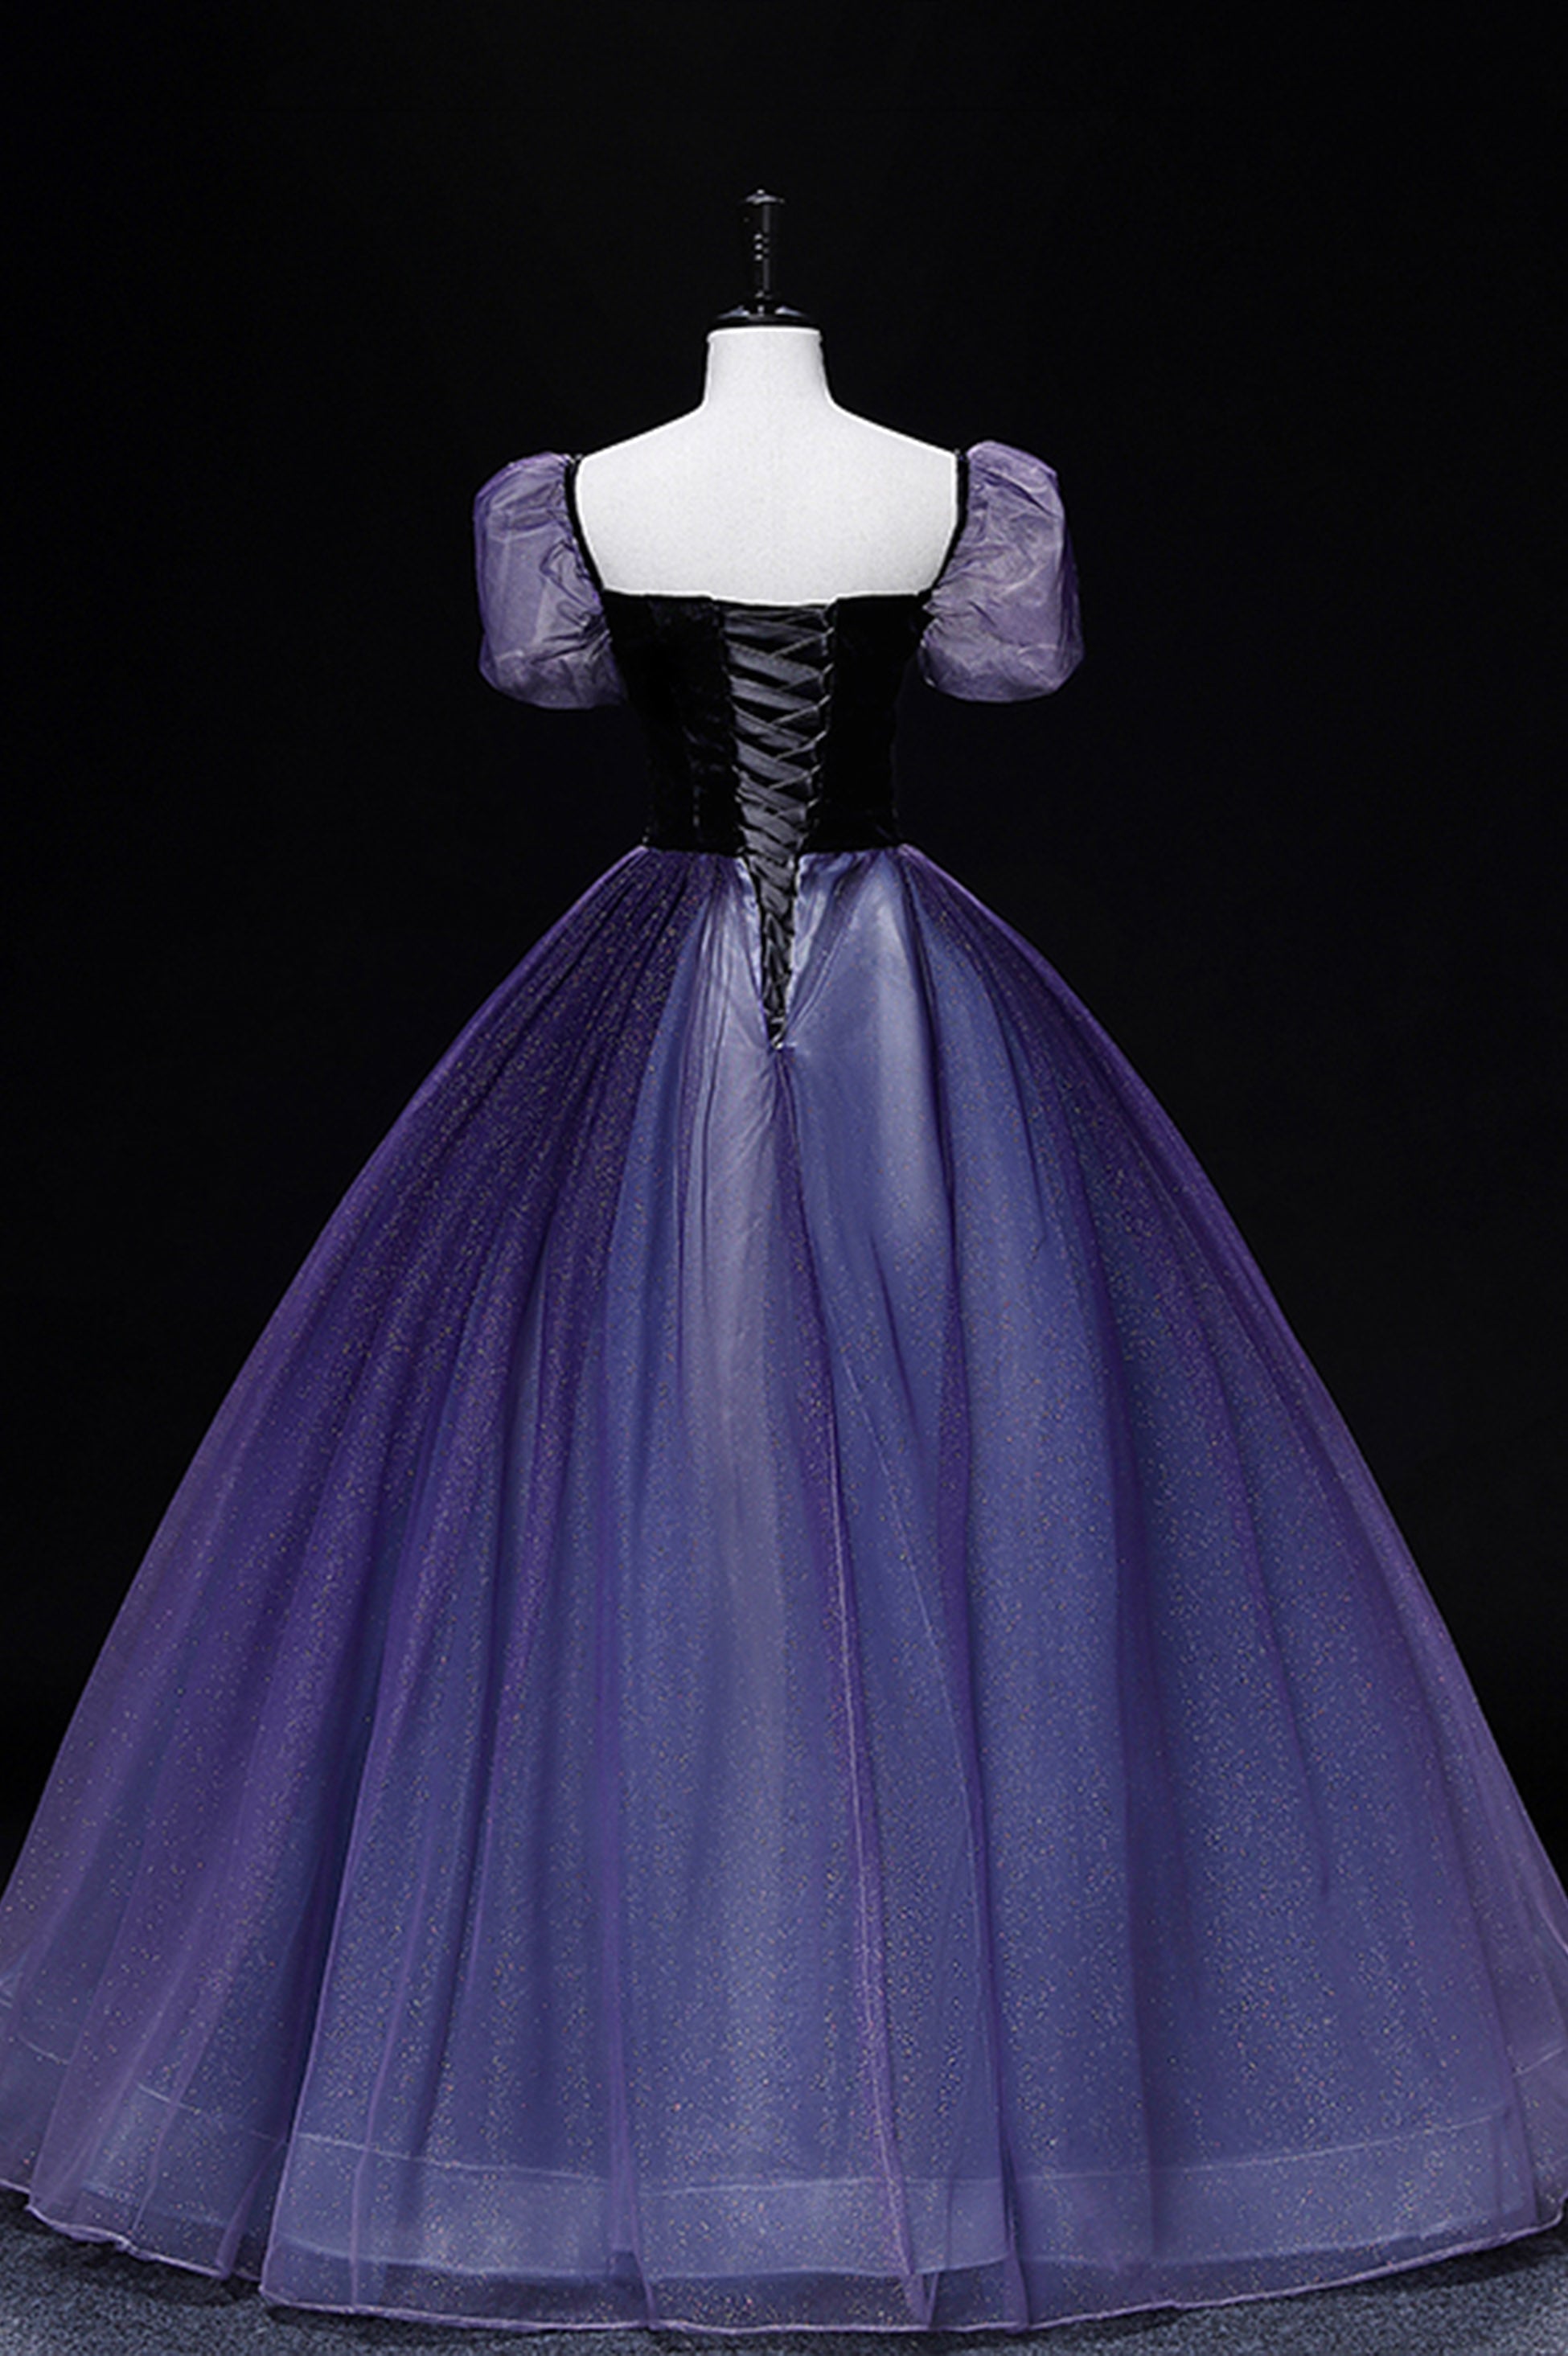 Prom Dresses Chicago, Purple Tulle Long A-Line Prom Dress, Purple Short Sleeve Princess Dress